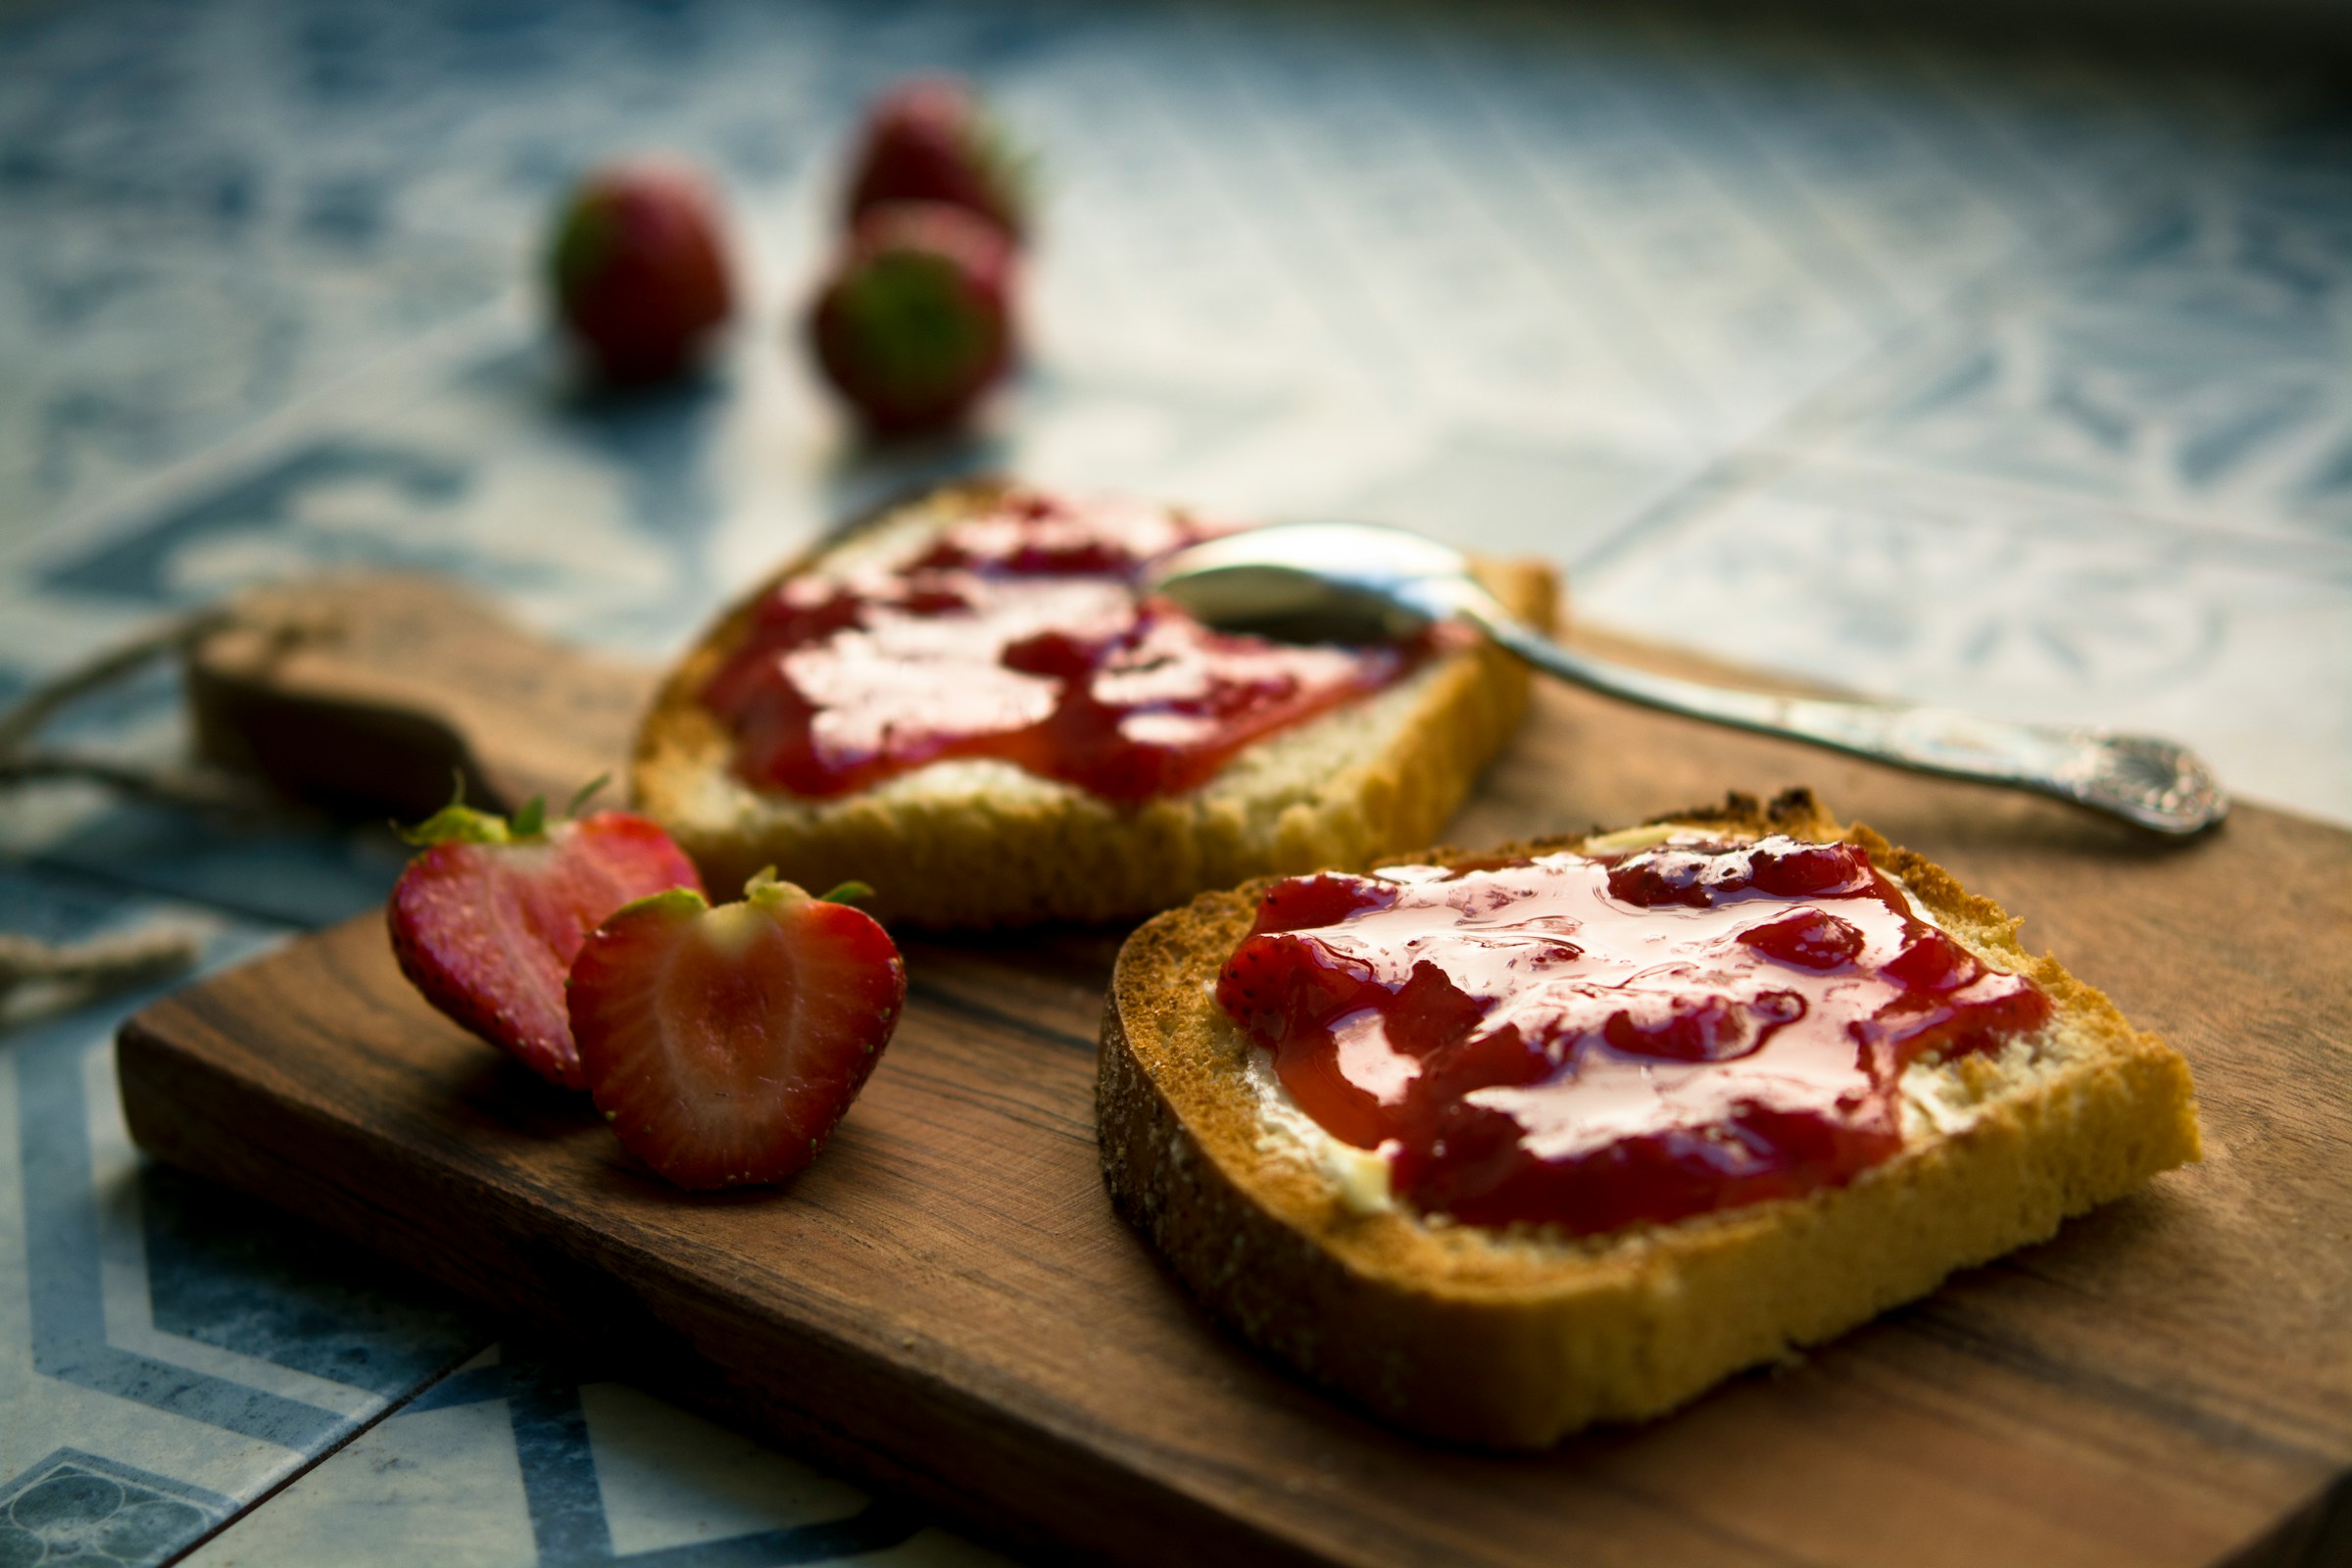 Toast and jam on a board | Source: Unsplash